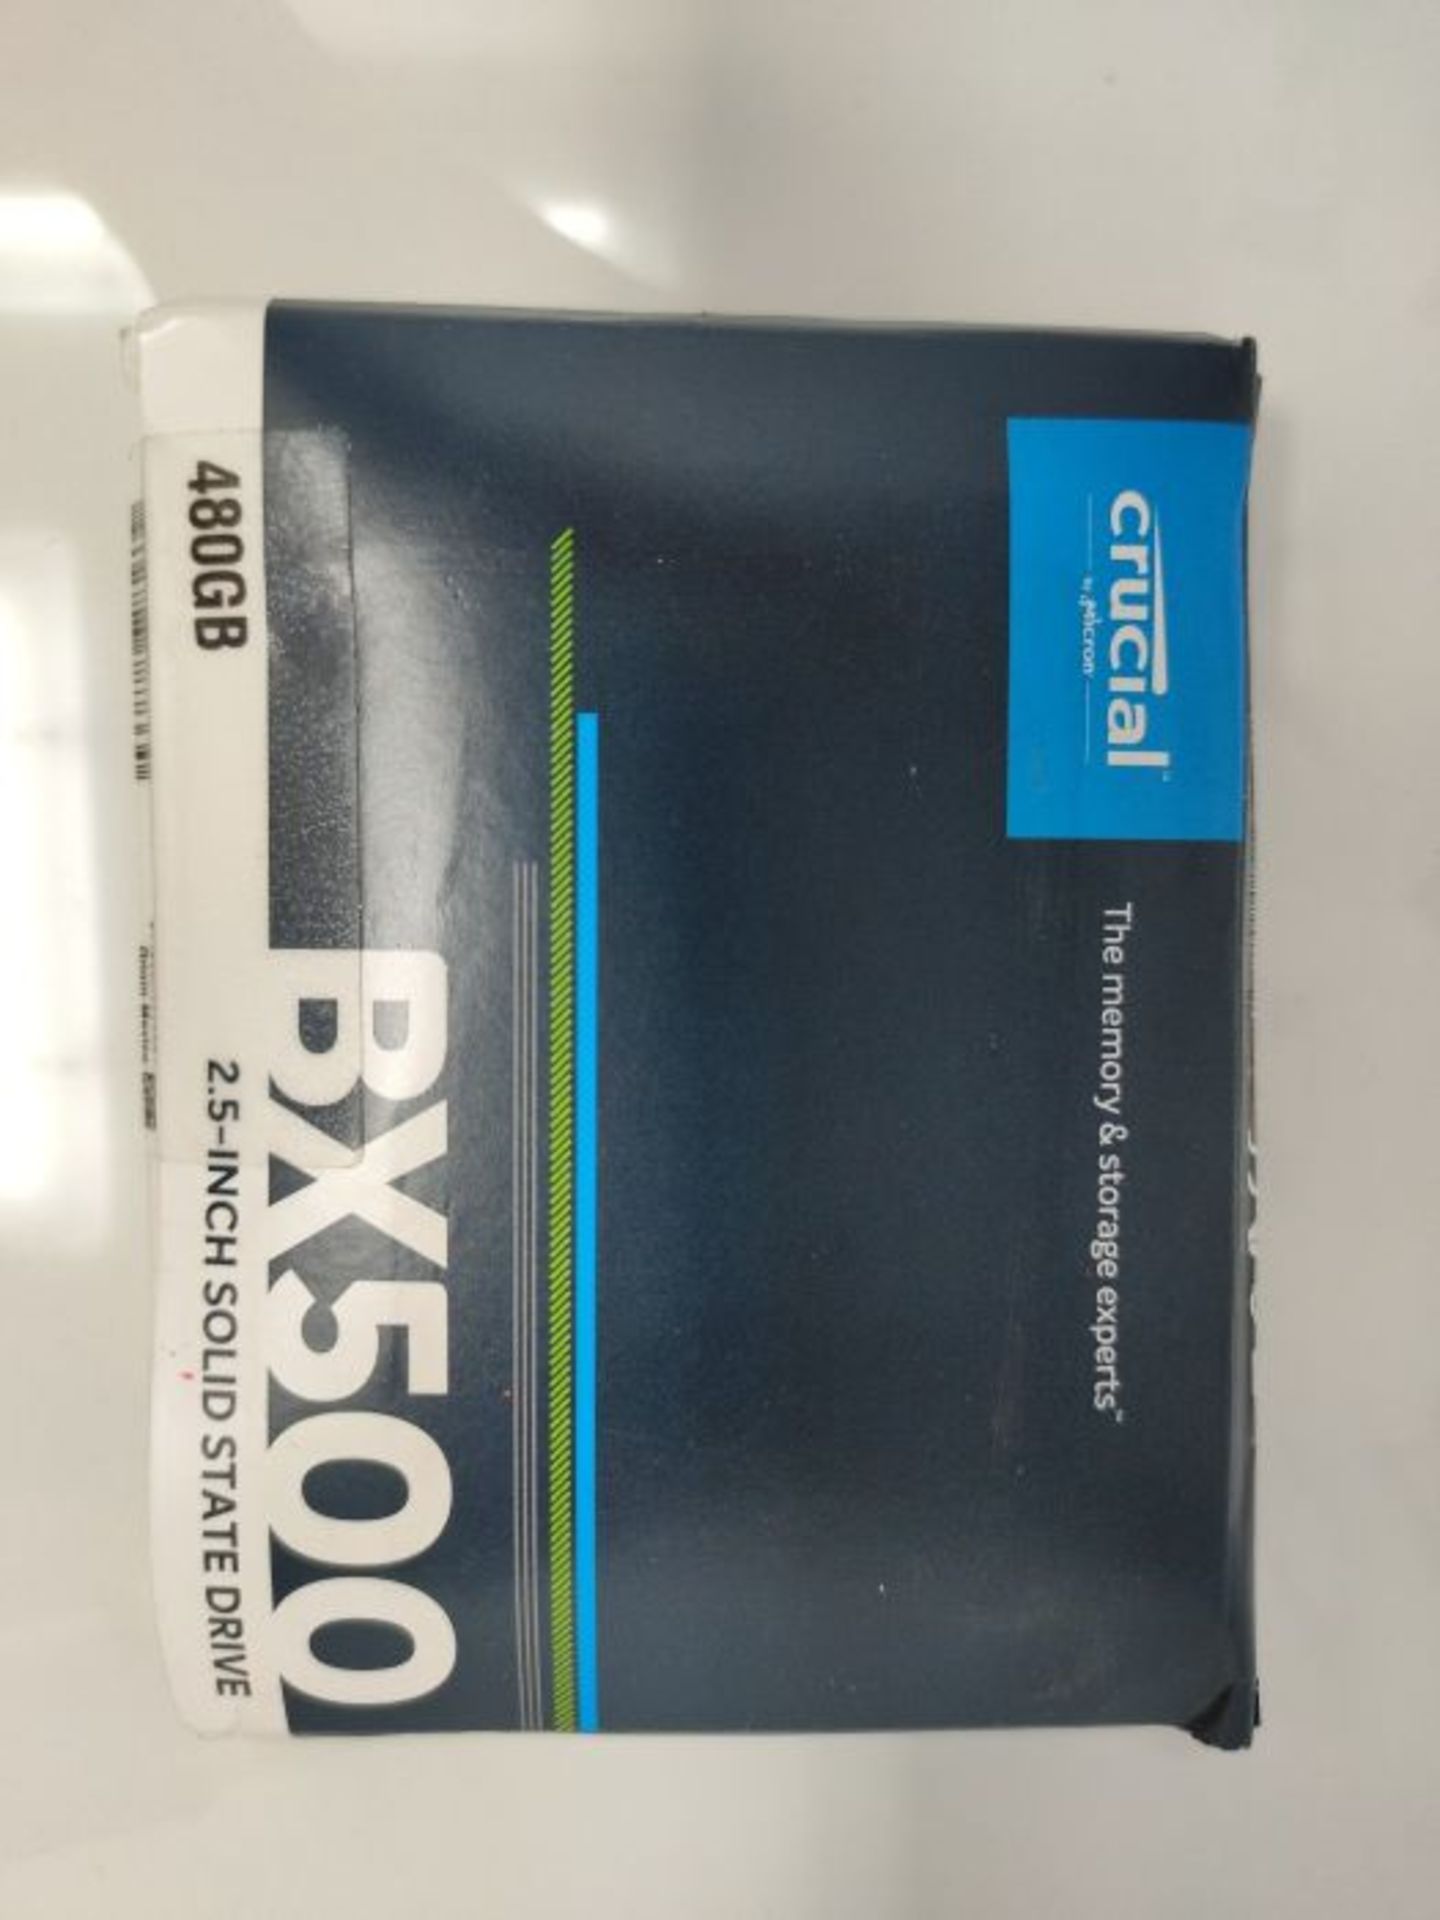 Crucial BX500 480 GB CT480BX500SSD1-Up to 540 MB/s (Internal SSD, 3D NAND, SATA, 2.5 I - Image 2 of 3